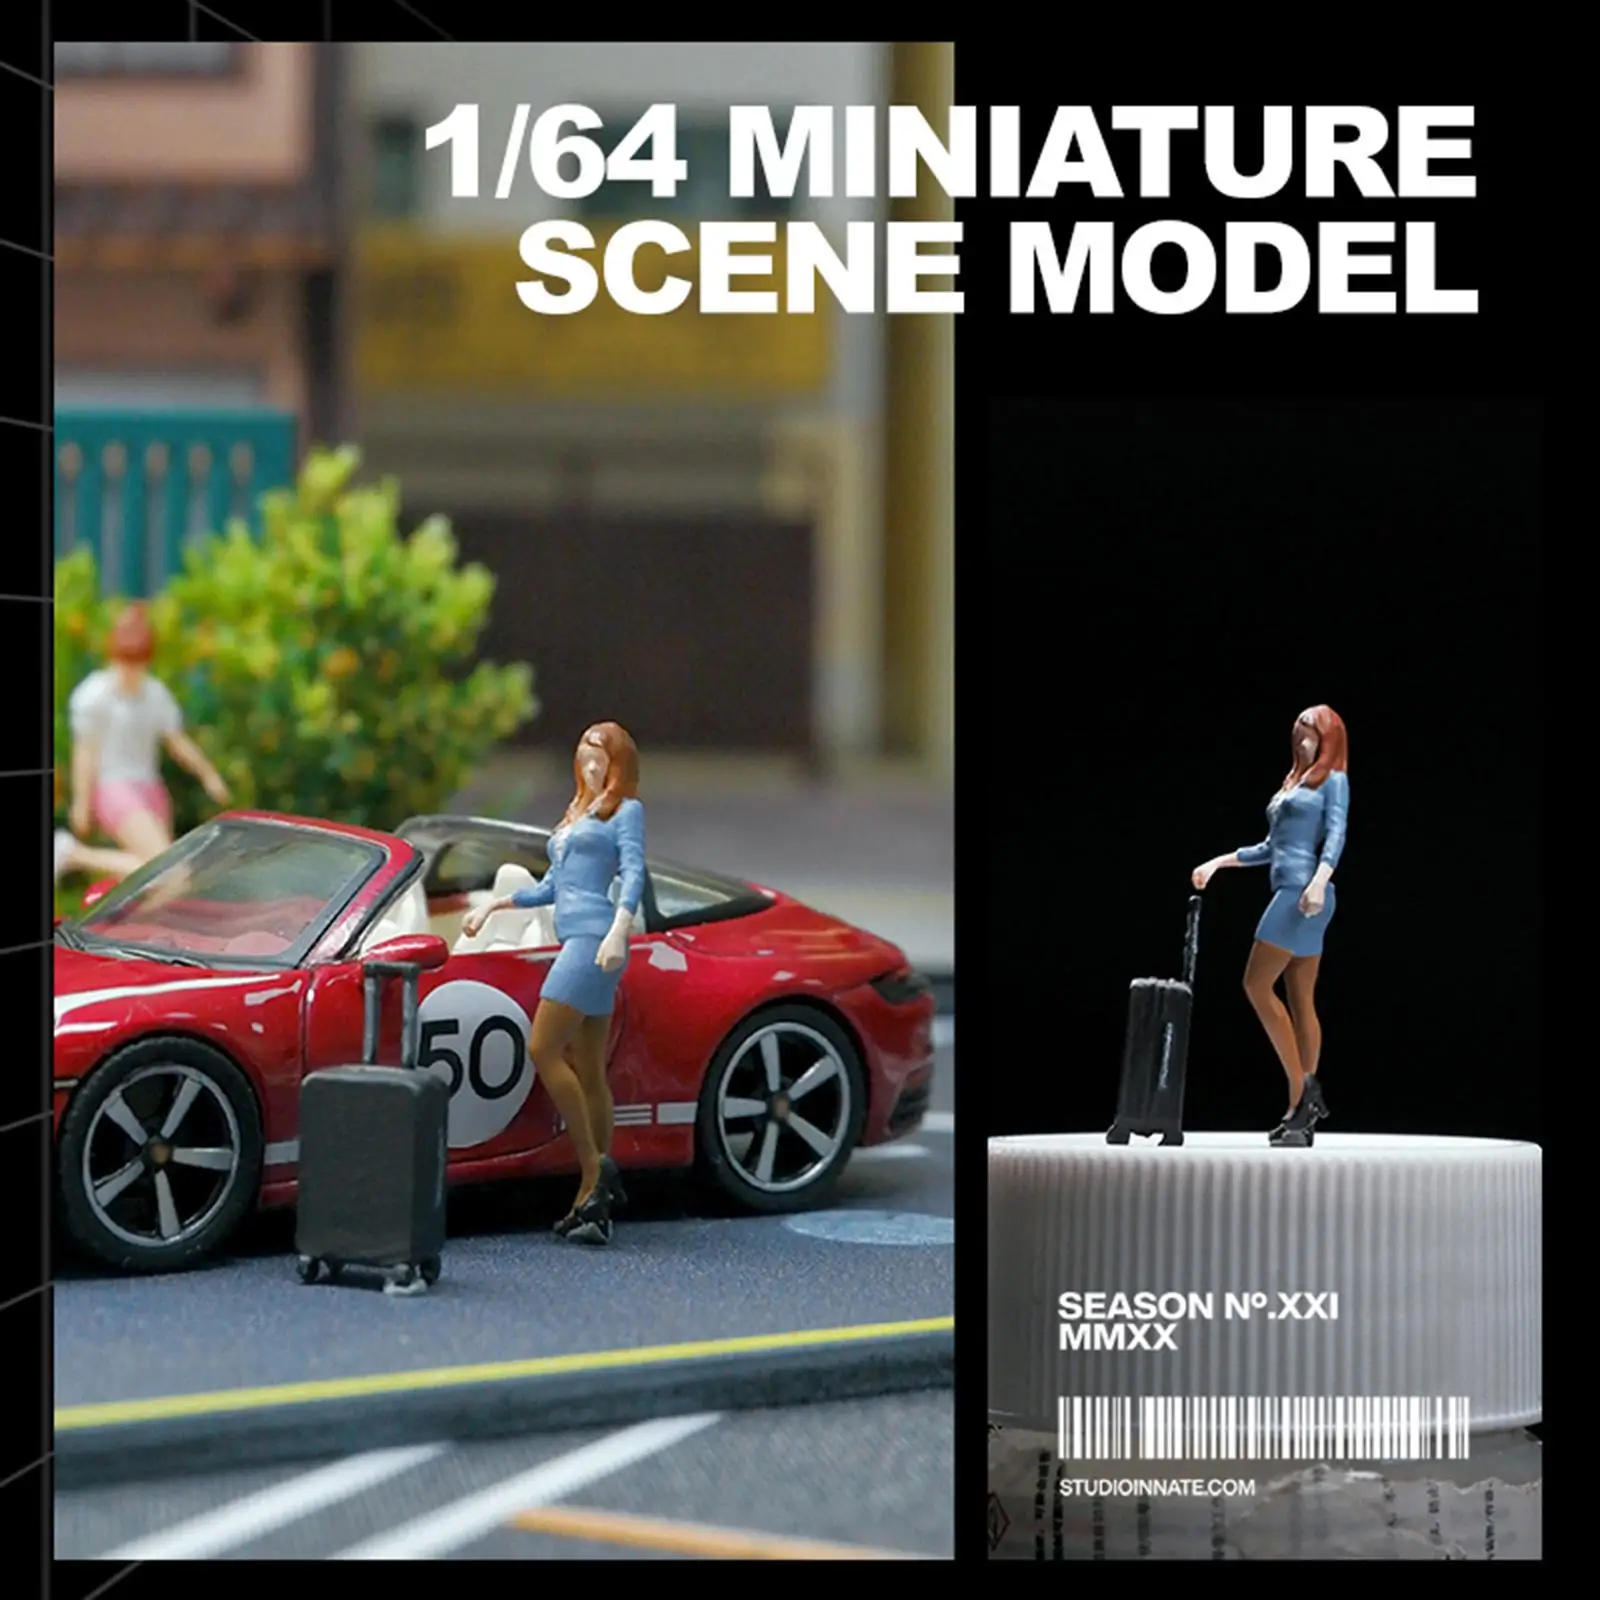 1:64 Scale Girl Figures with Suitcase Resin Role Play Figure Props People Figure Layout for Train Station Layout Miniature Scene